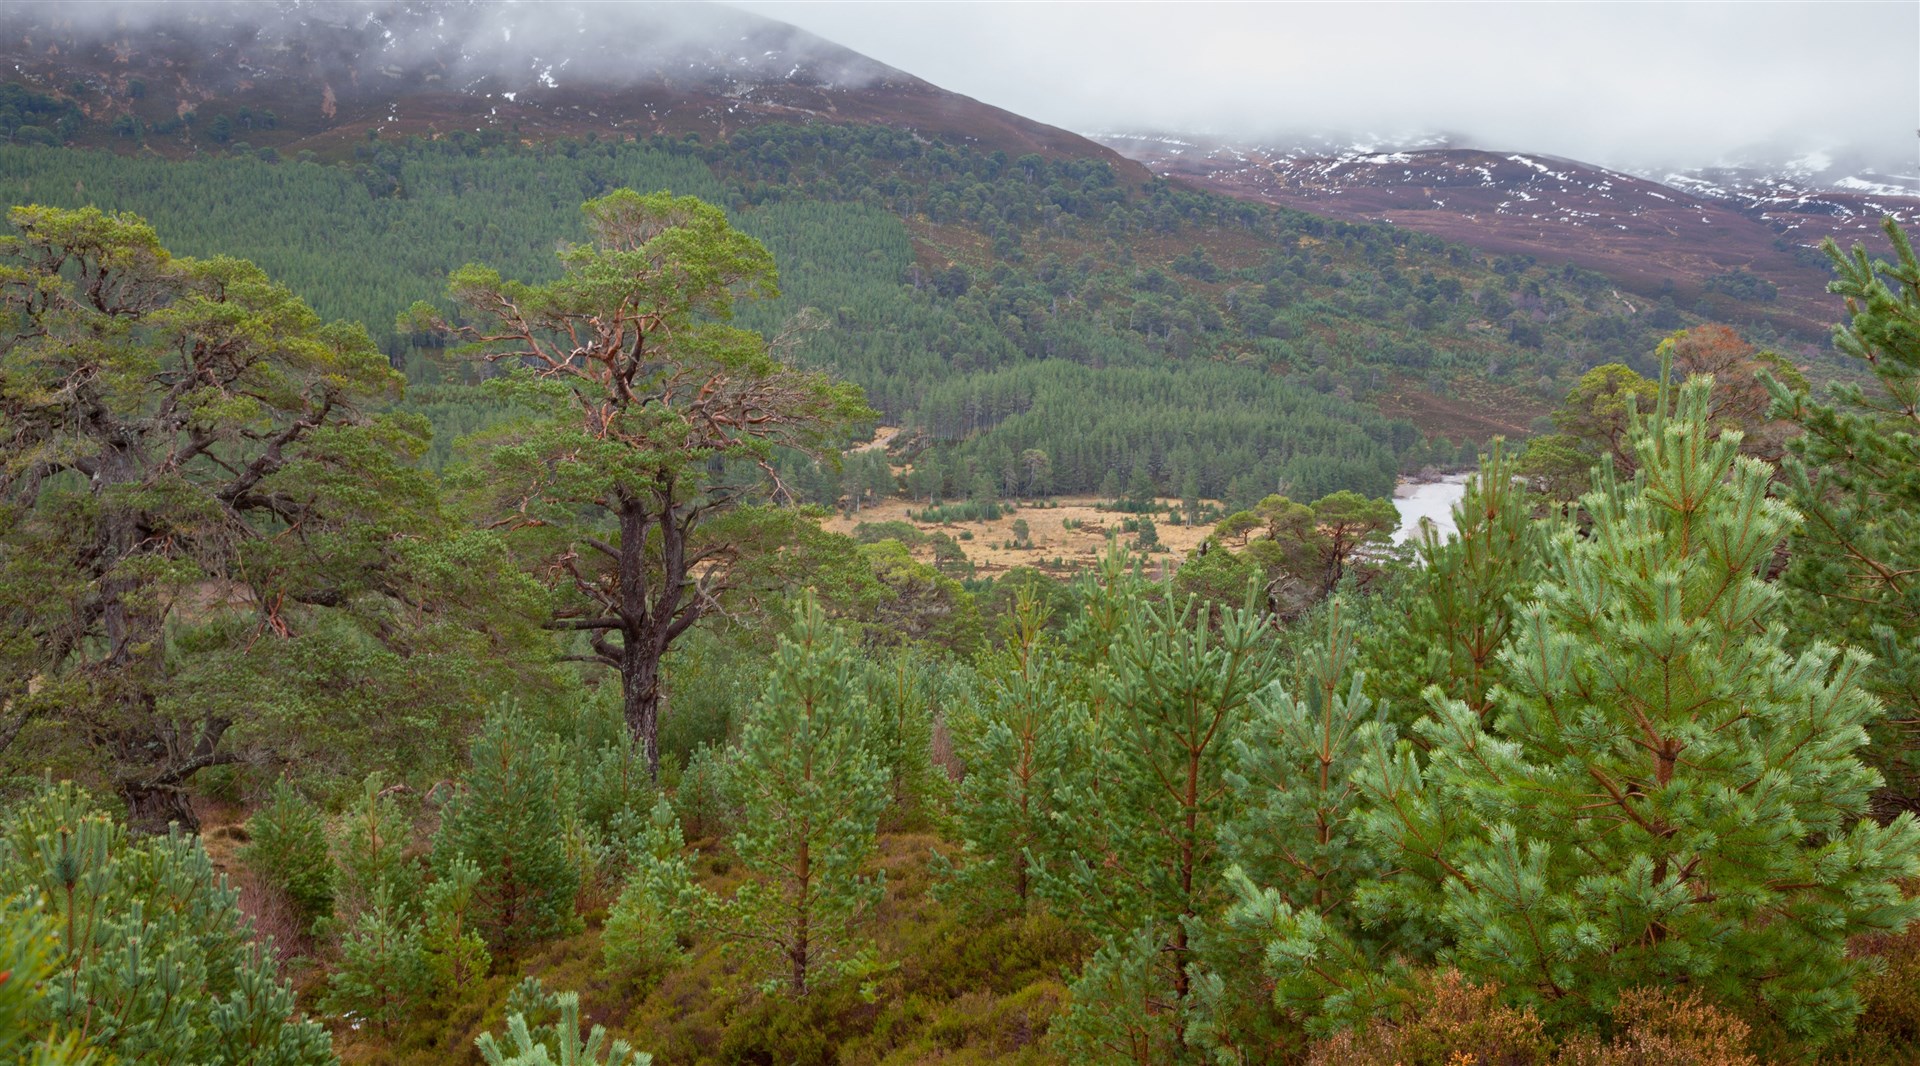 There is a 200-year vision for the rewilding of Glenfeshie.